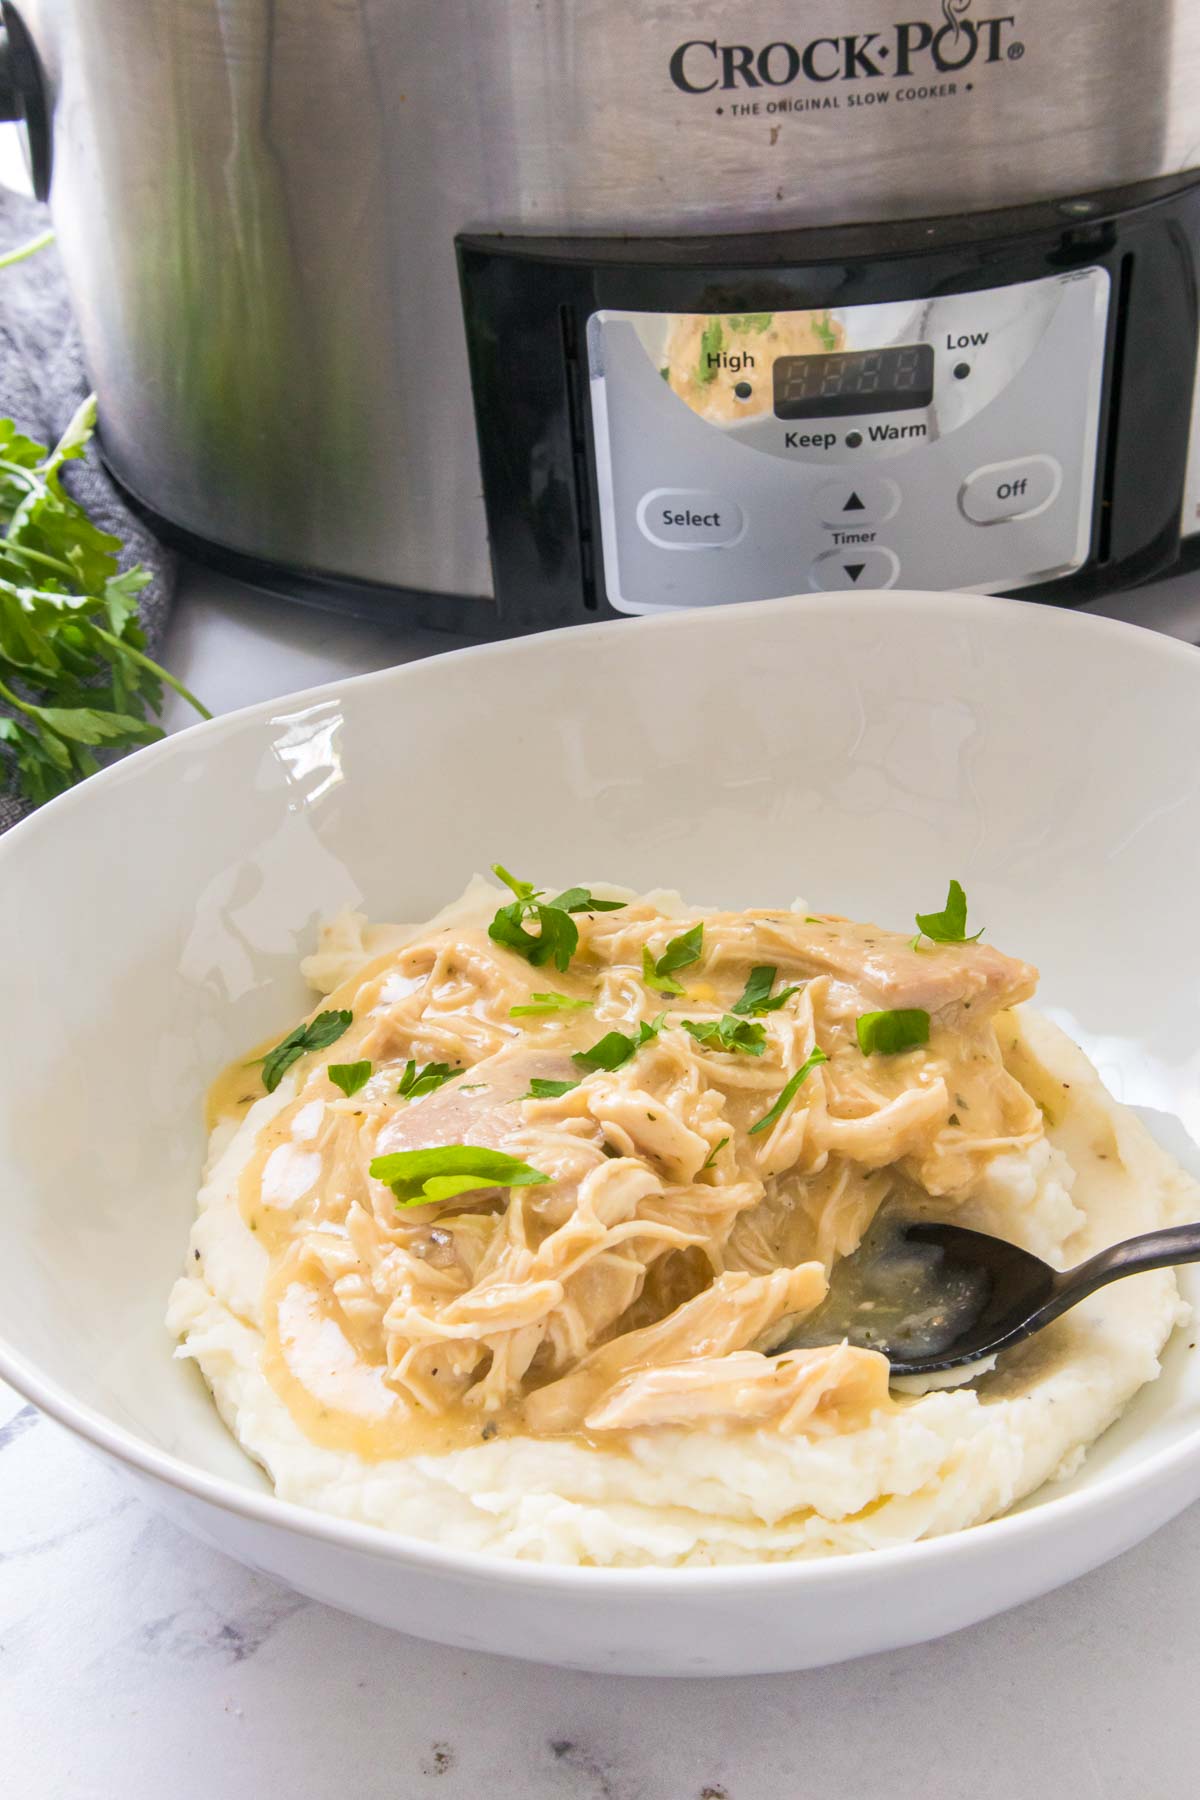 Shredded chicken in creamy gravy over mashed potatoes in a plate next to a slow cooker